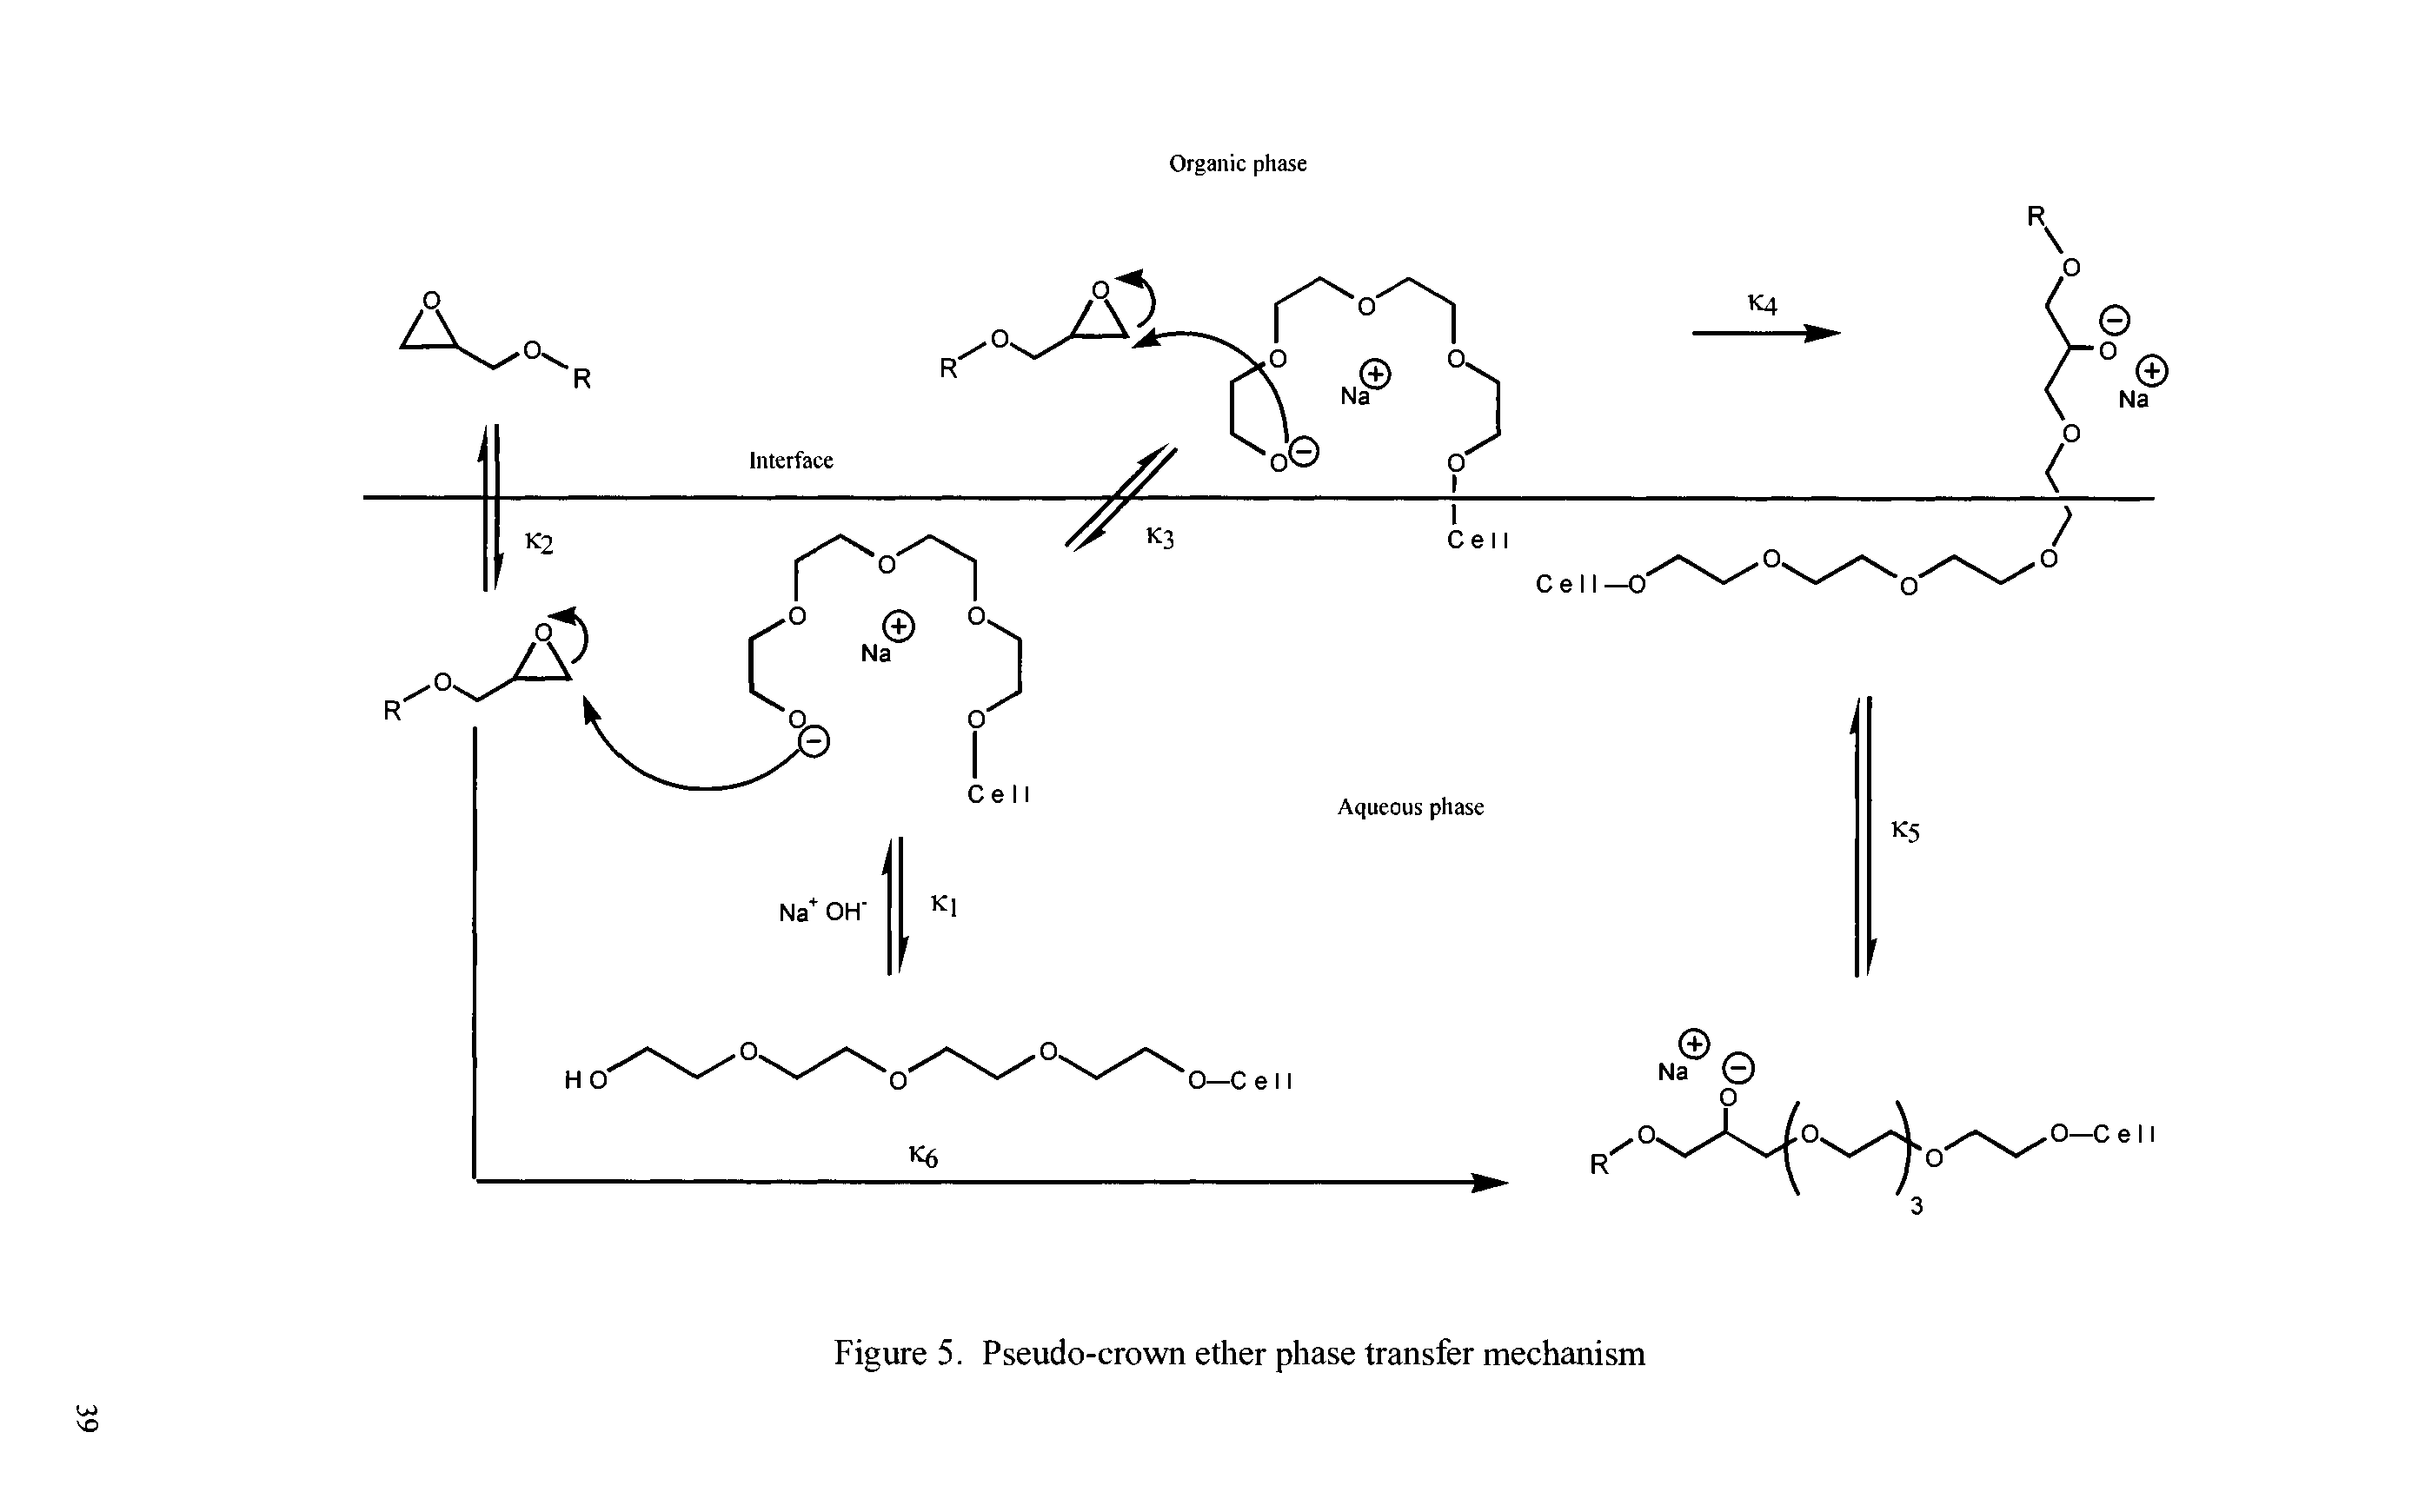 Figure 5. Pseudo-crown ether phase transfer mechanism...